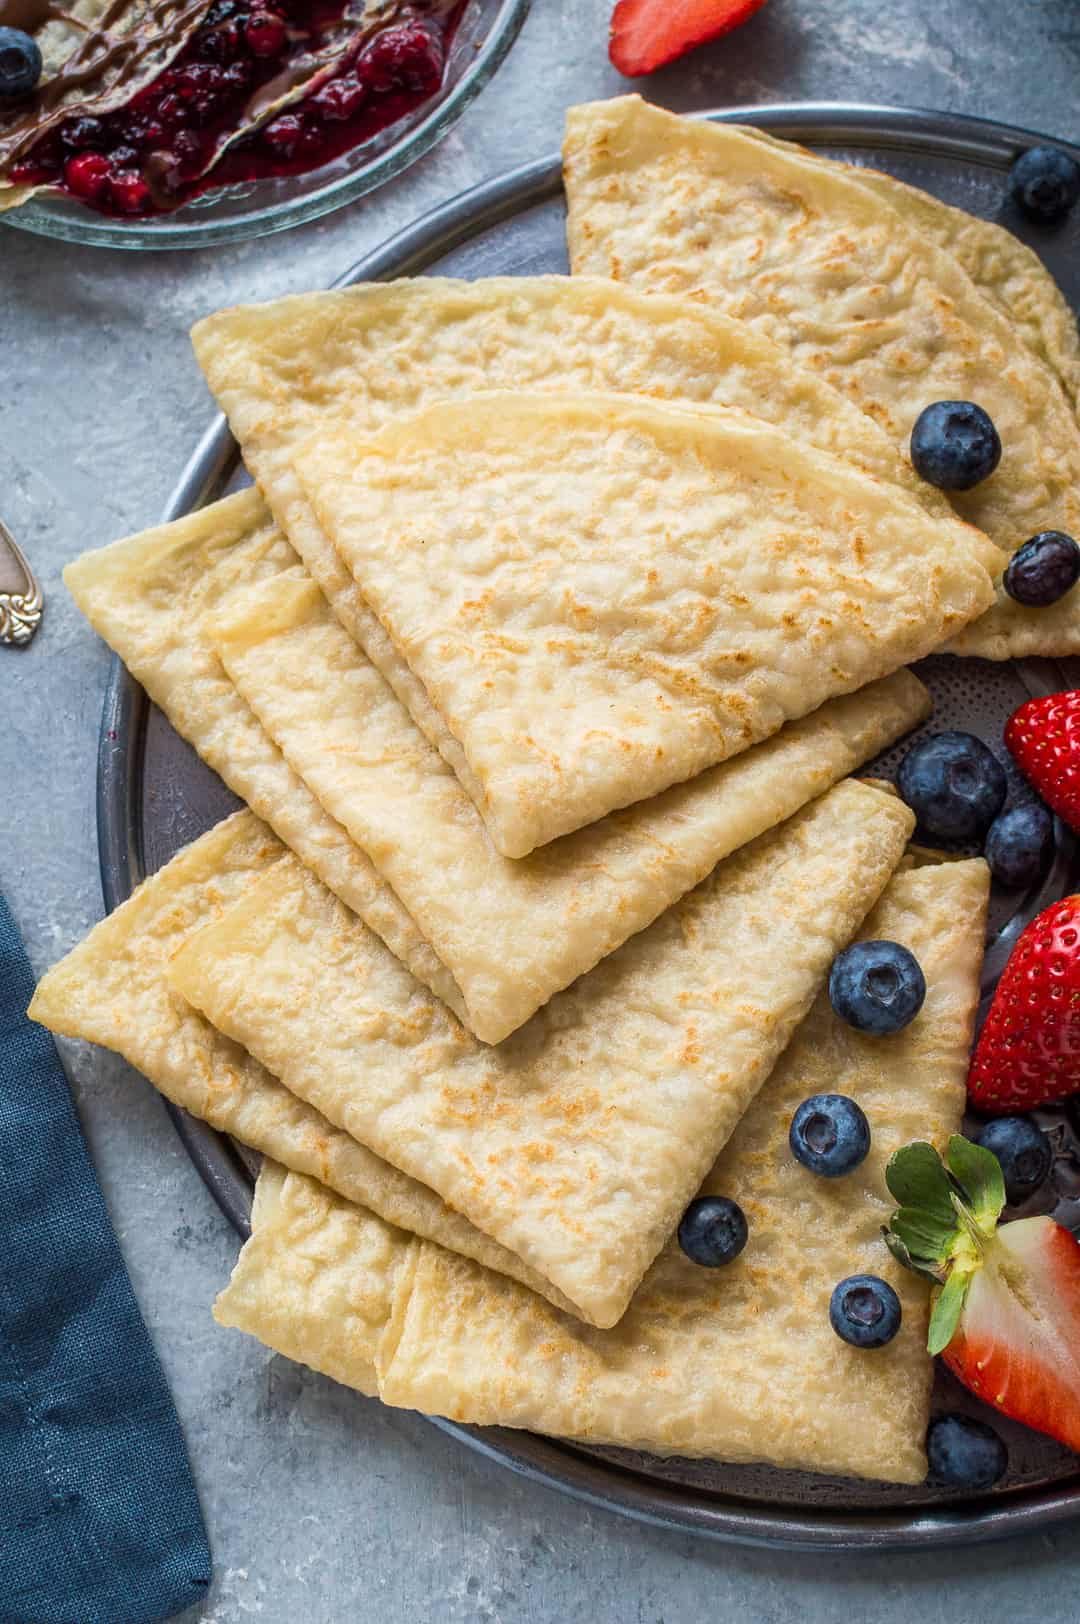 A plateful of egg and dairy free vegan crepes (pancakes) with fresh berries.